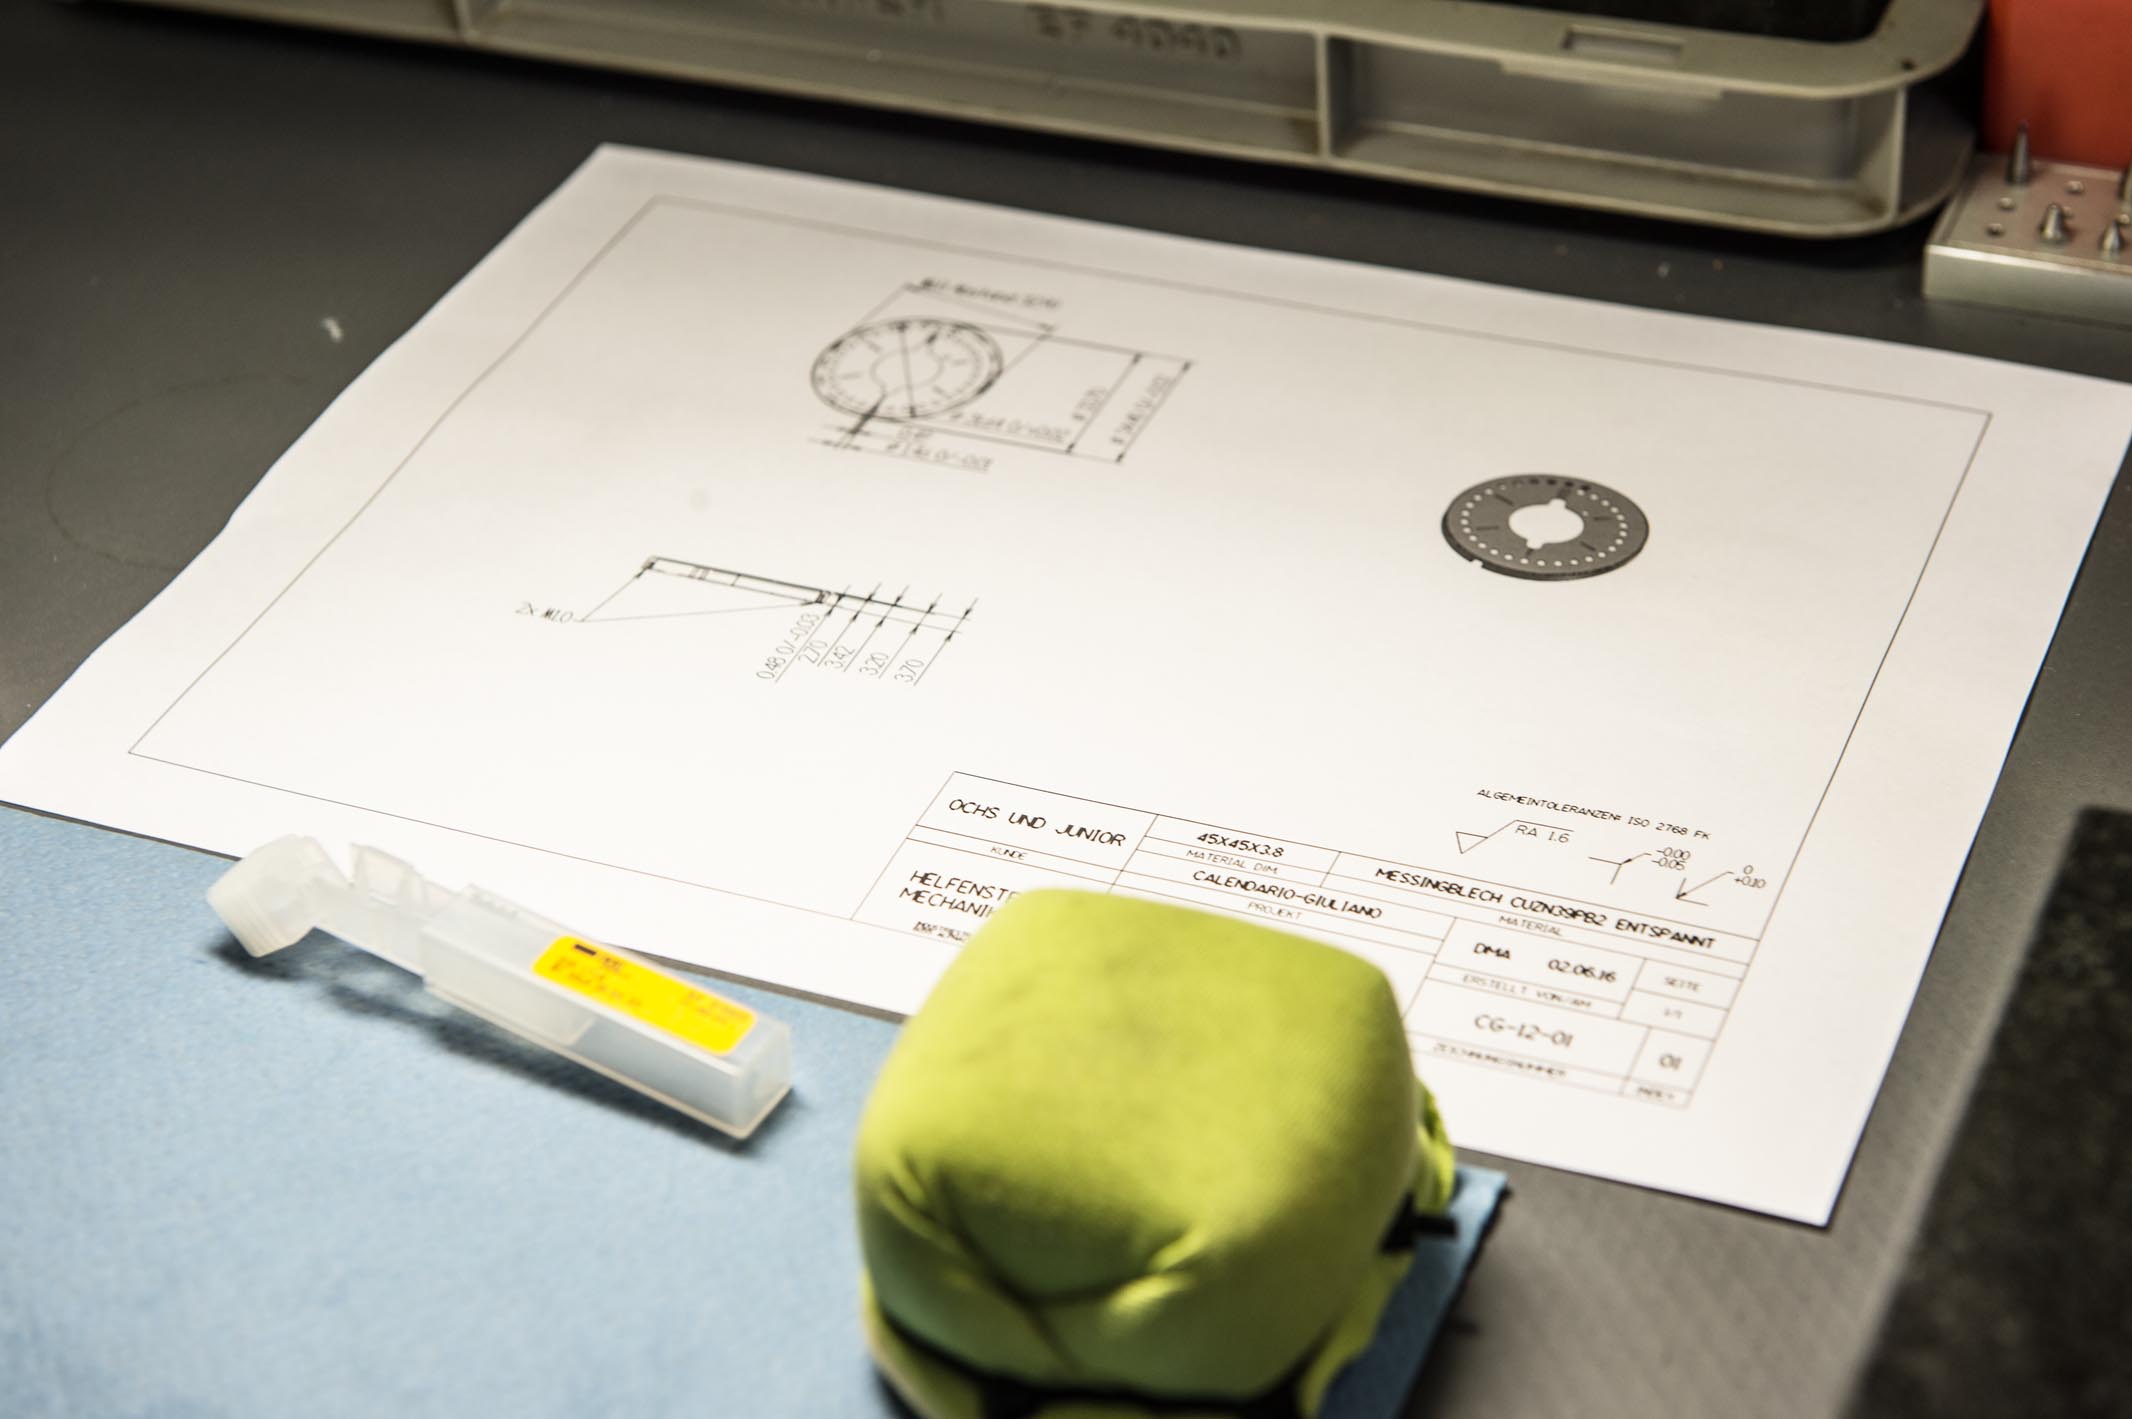 Daniel Matter compares the results with the specifications on the drawings. If needed, he corrects any measured deviations directly at the machine.